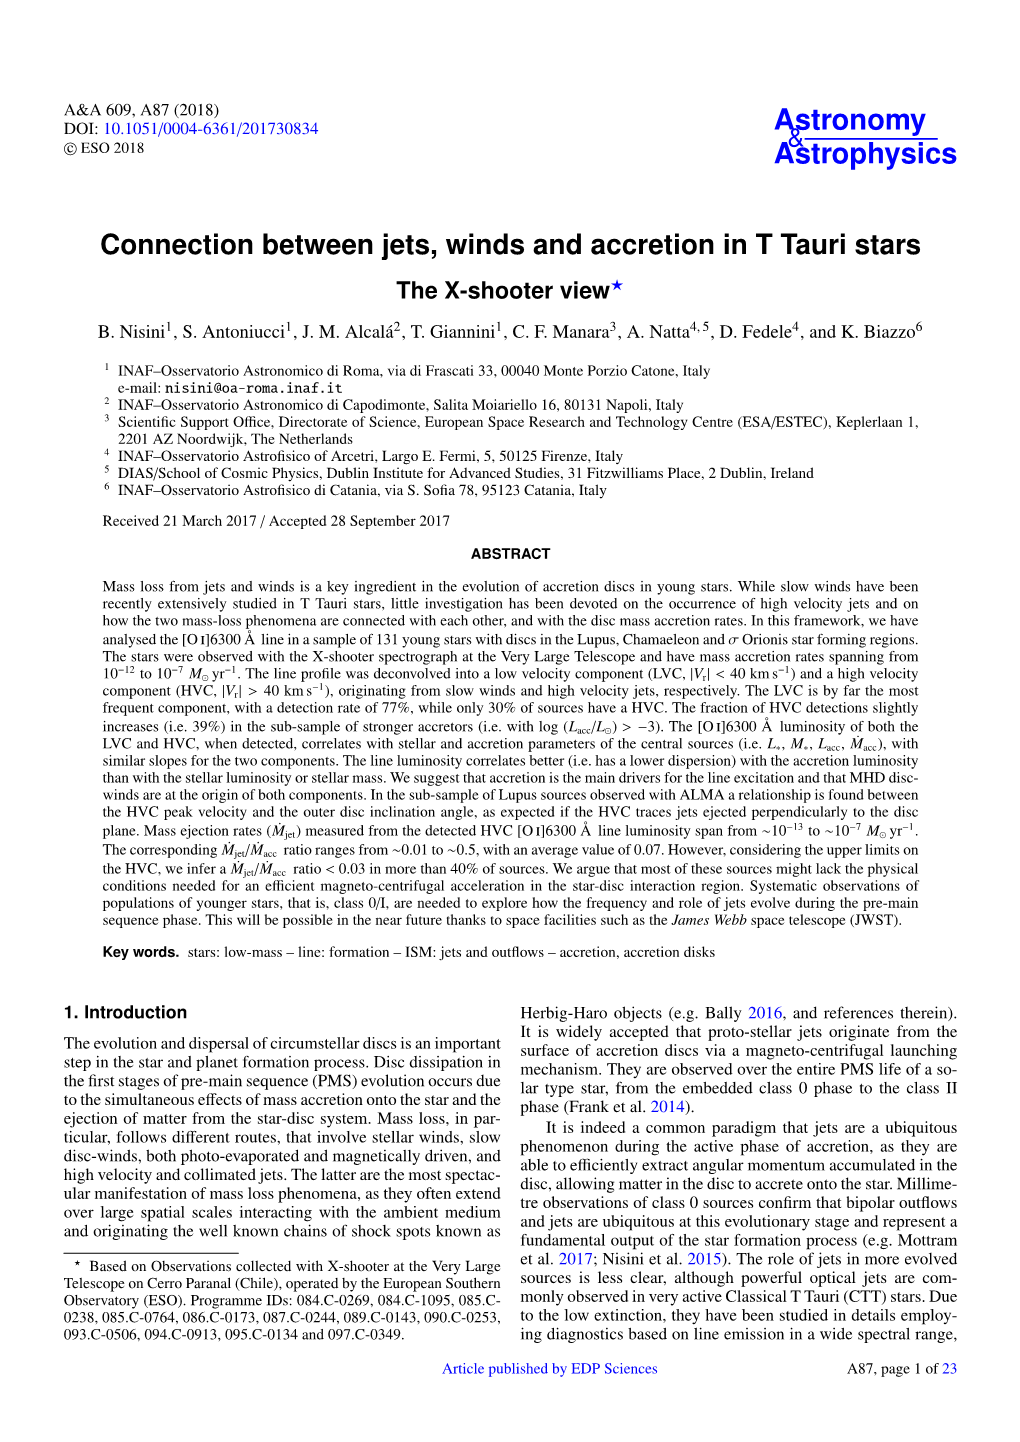 Connection Between Jets, Winds and Accretion in T Tauri Stars the X-Shooter View?